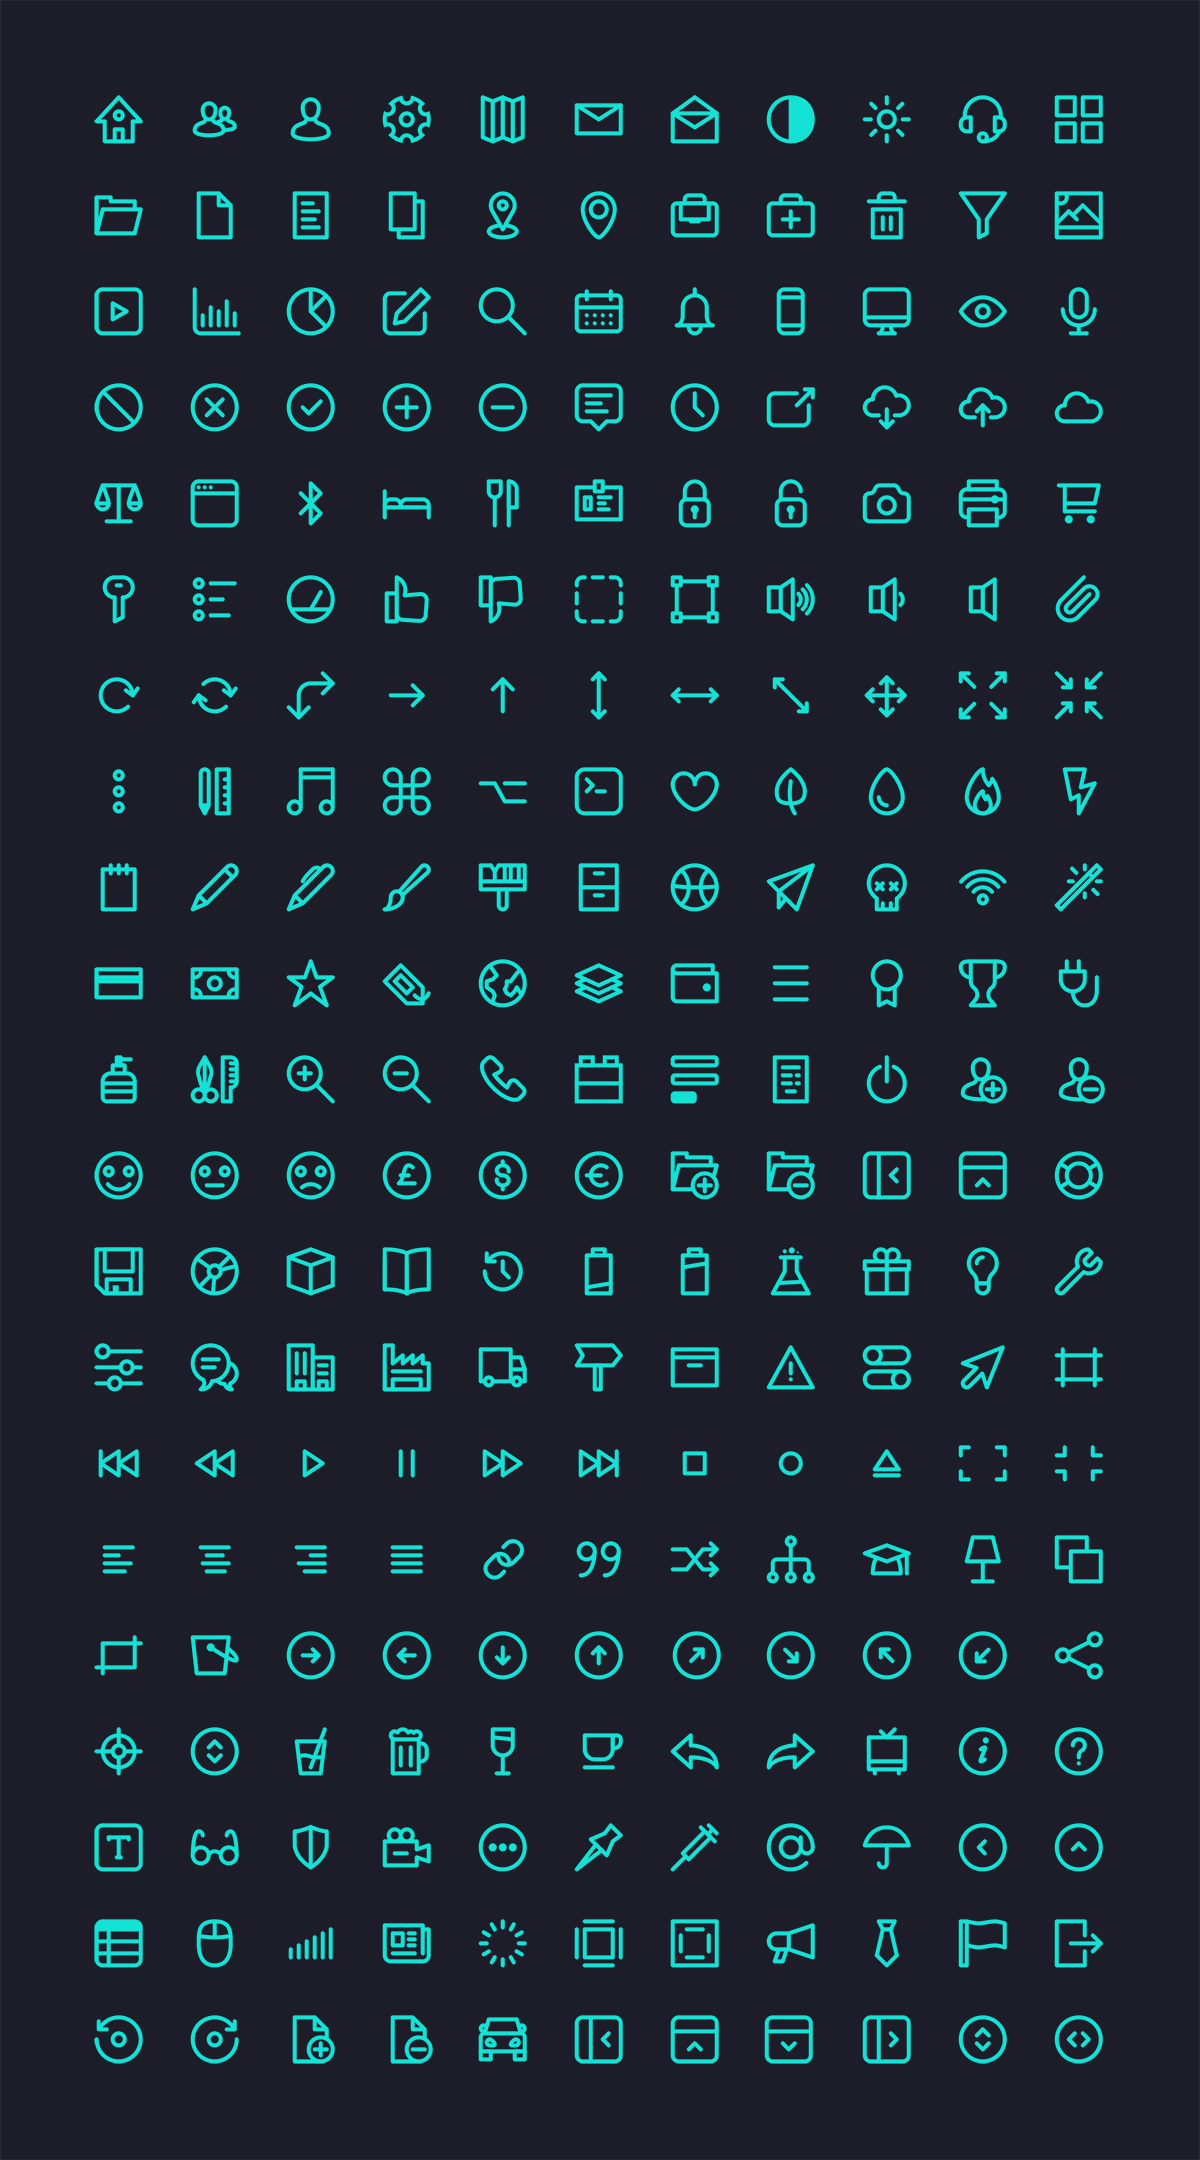 Free Icons - Micons: 231 icons